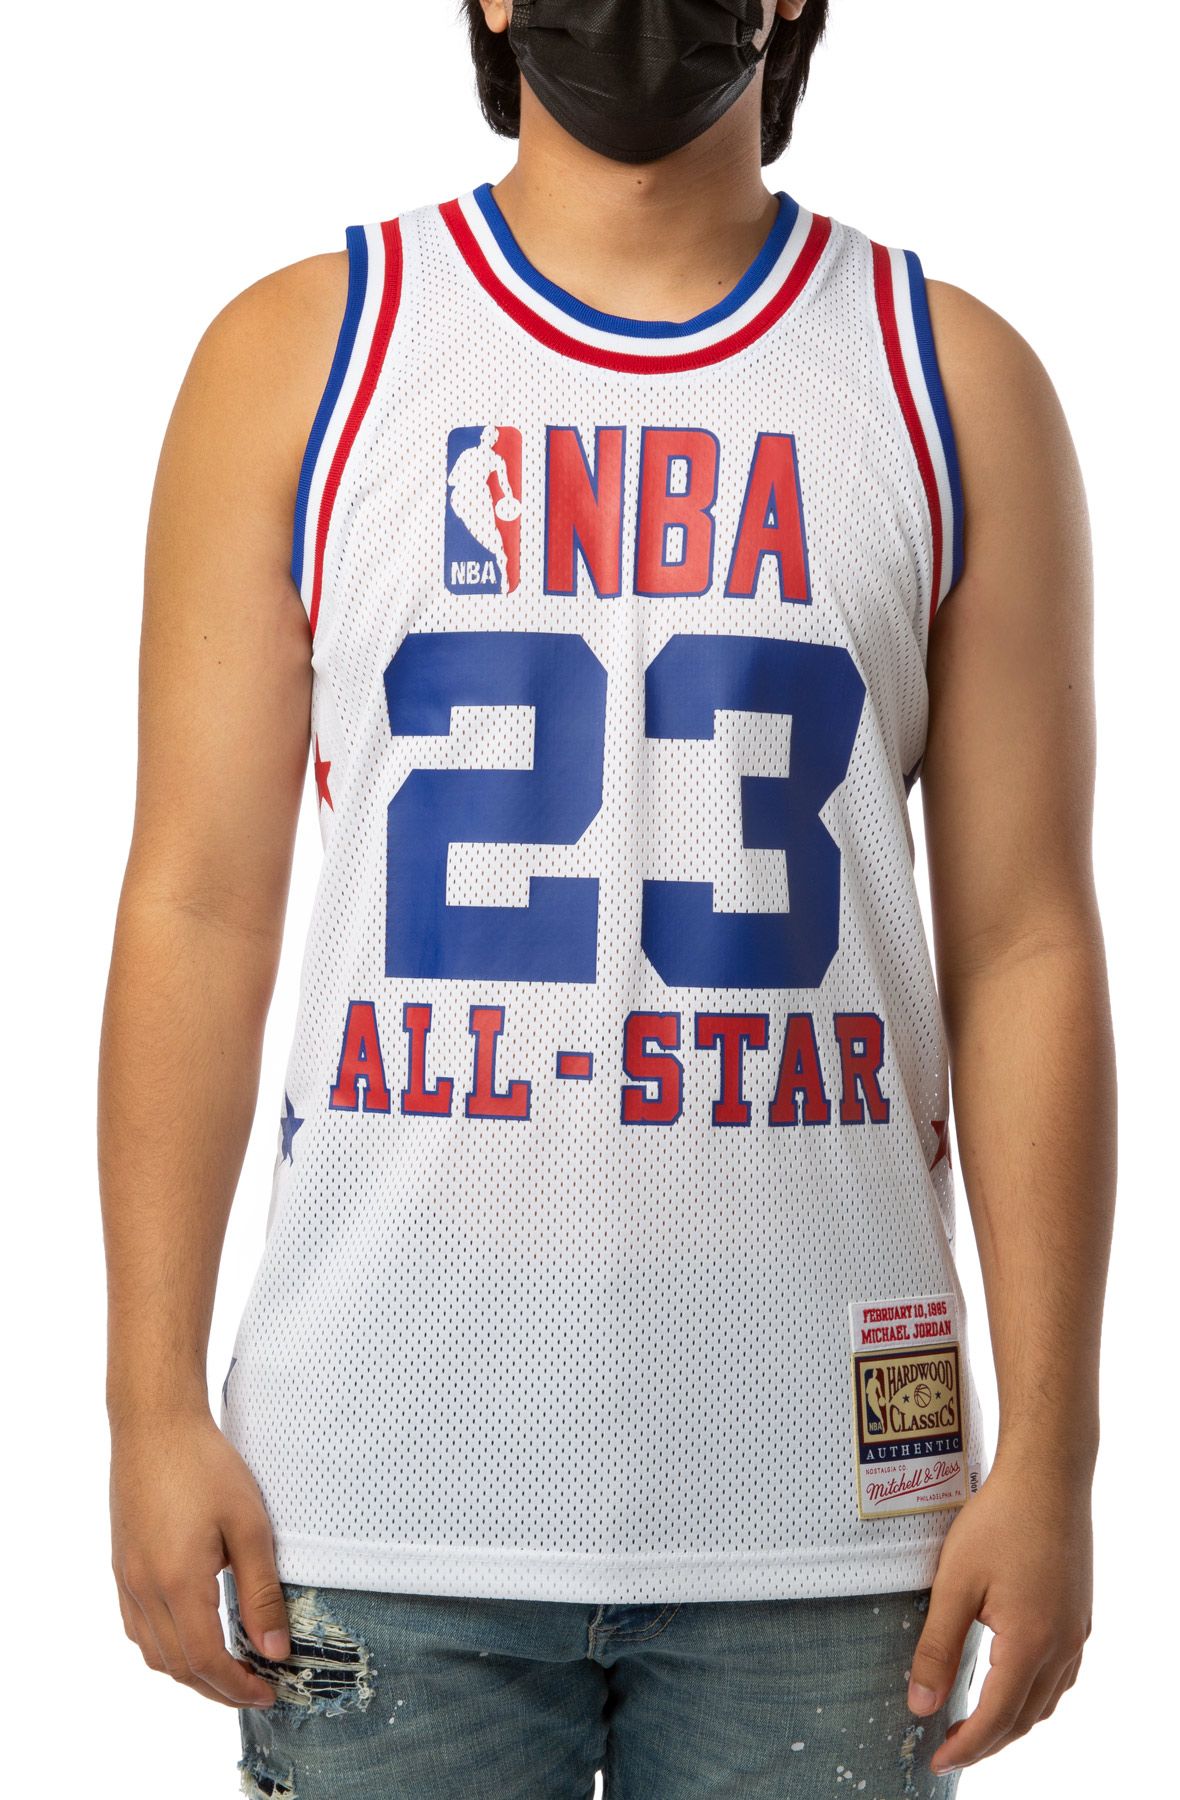 Michael Jordan Eastern Conference Mitchell & Ness 1985 NBA All-Star Game  Authentic Jersey - White